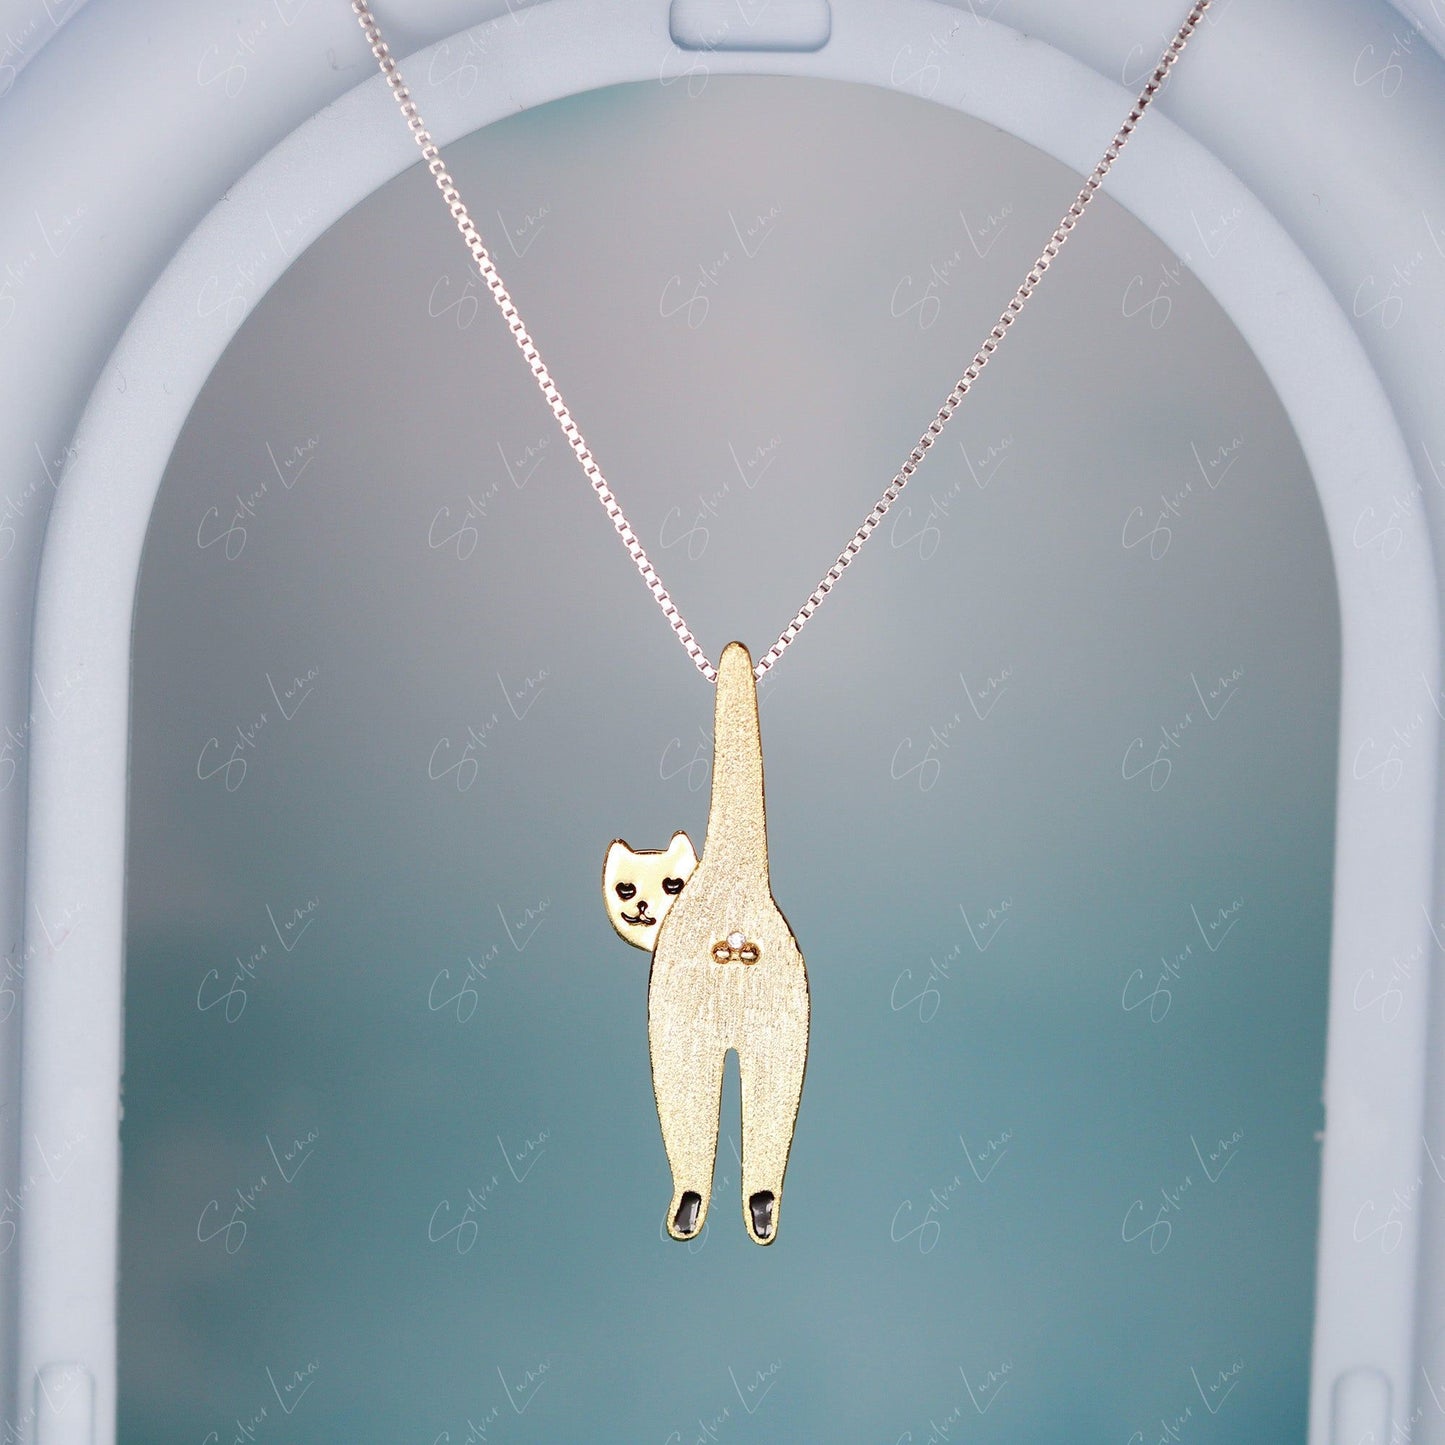 Naughty cat necklace and earrings set